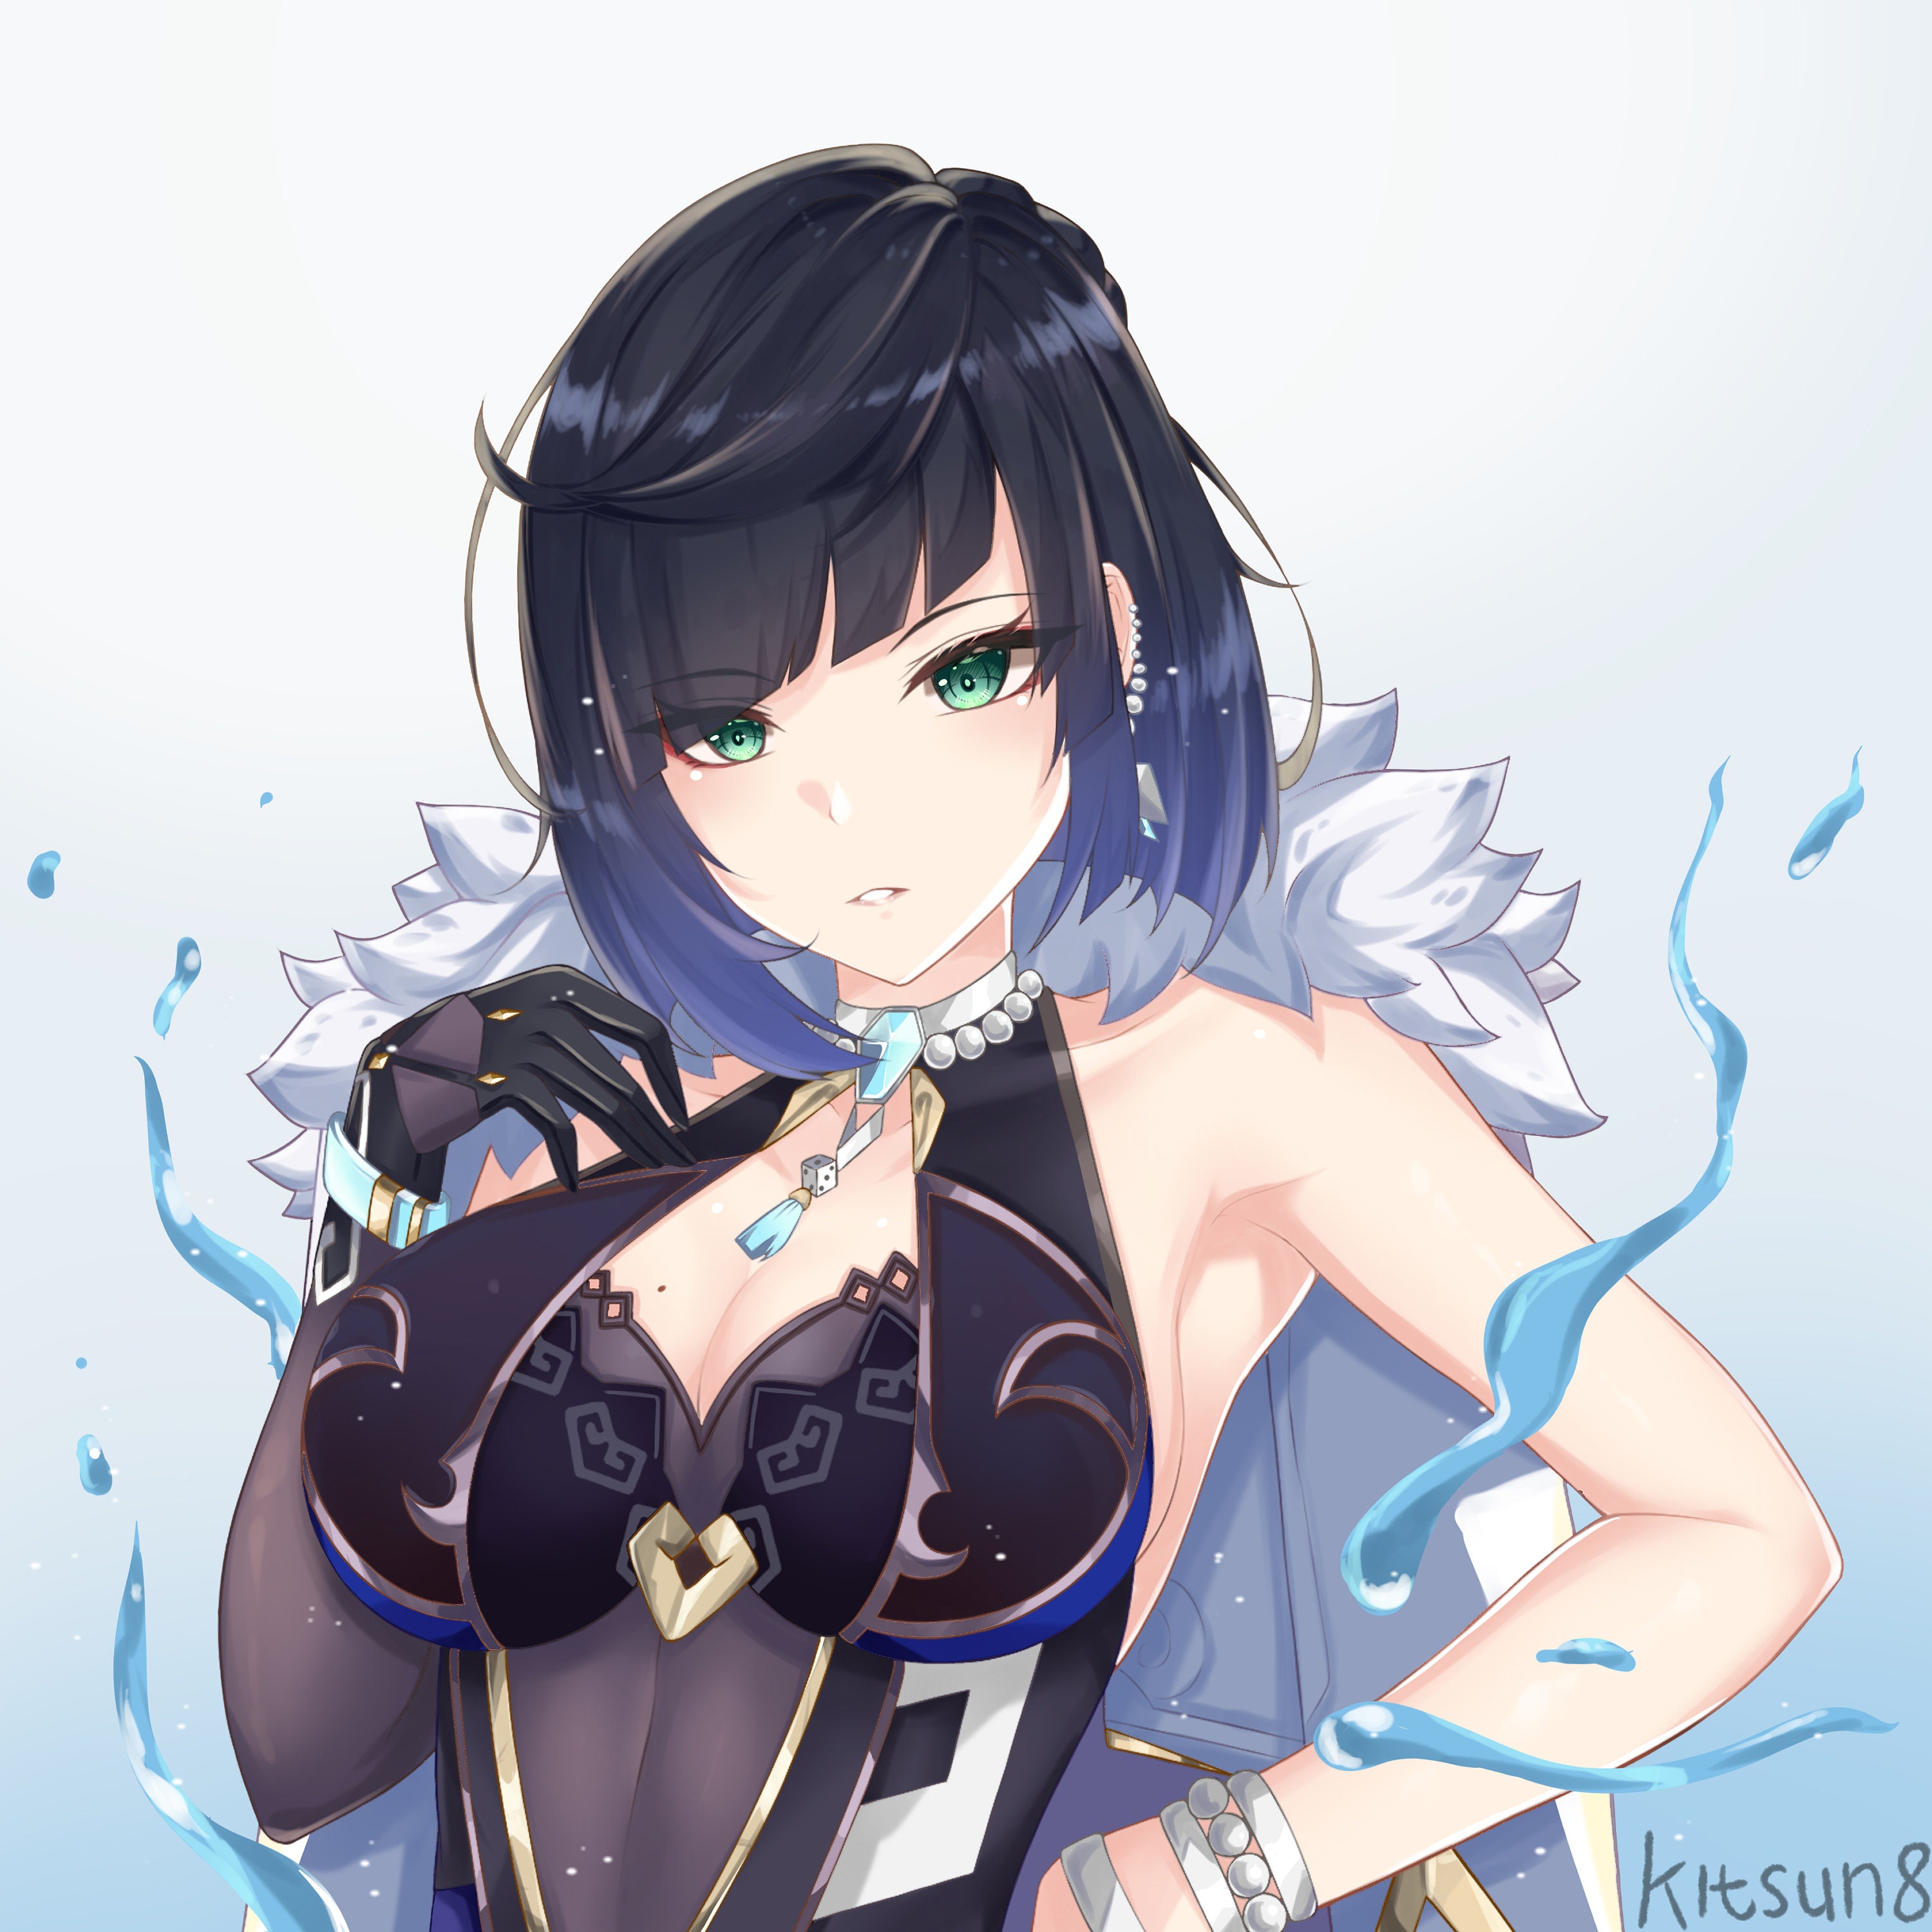 Is she an anime character or just a fan art? : r/anime